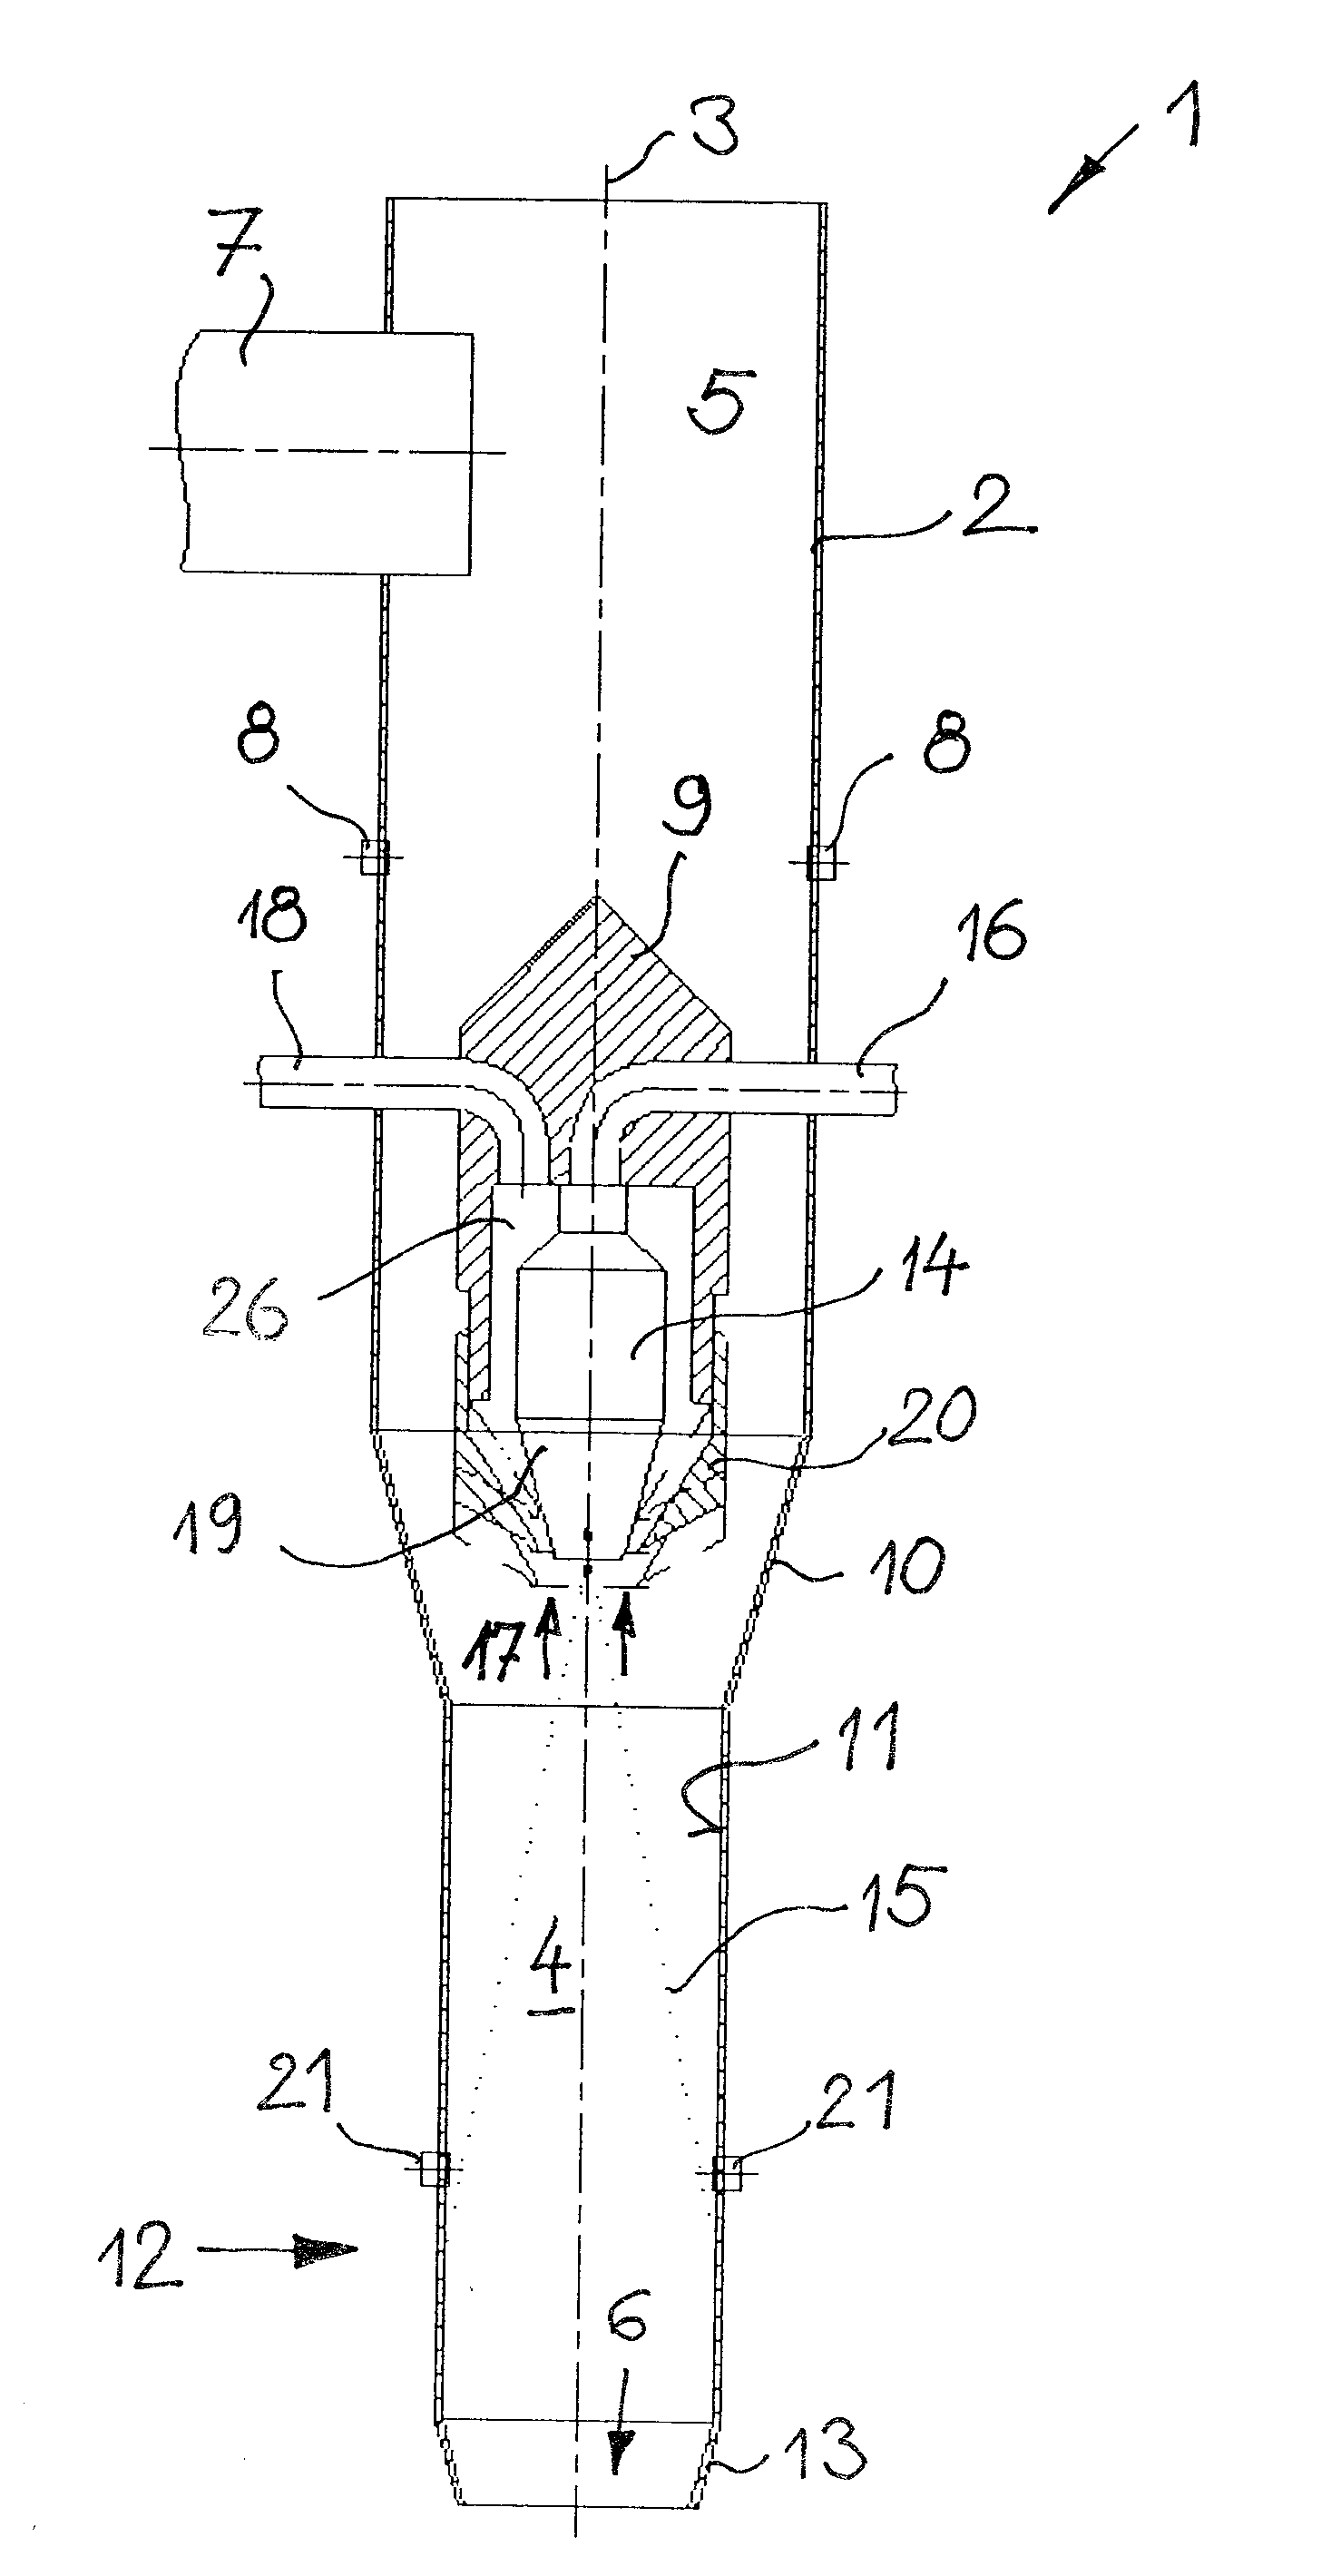 Device and Method for Admixing Liquids into Flowable Bulk Material